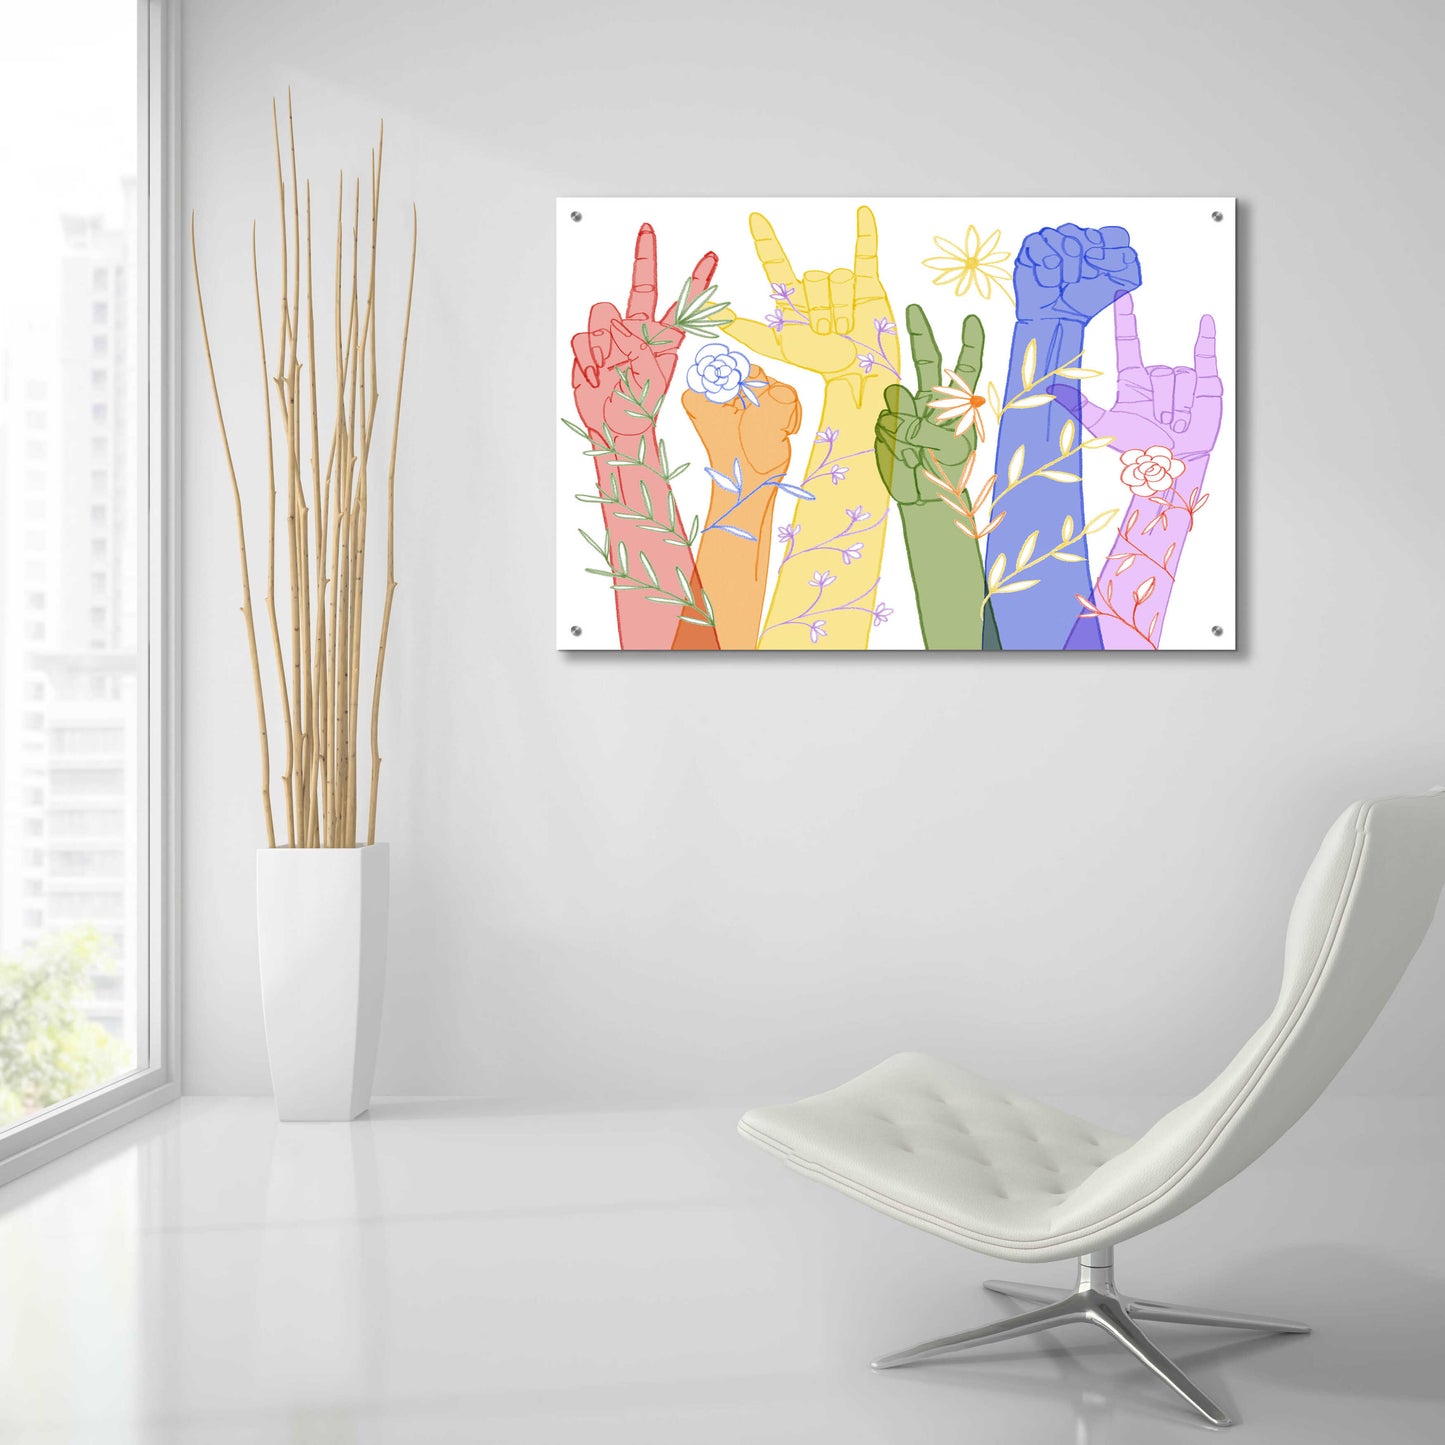 Epic Art 'Love Each Other Collection A' by Grace Popp, Acrylic Glass Wall Art,36x24